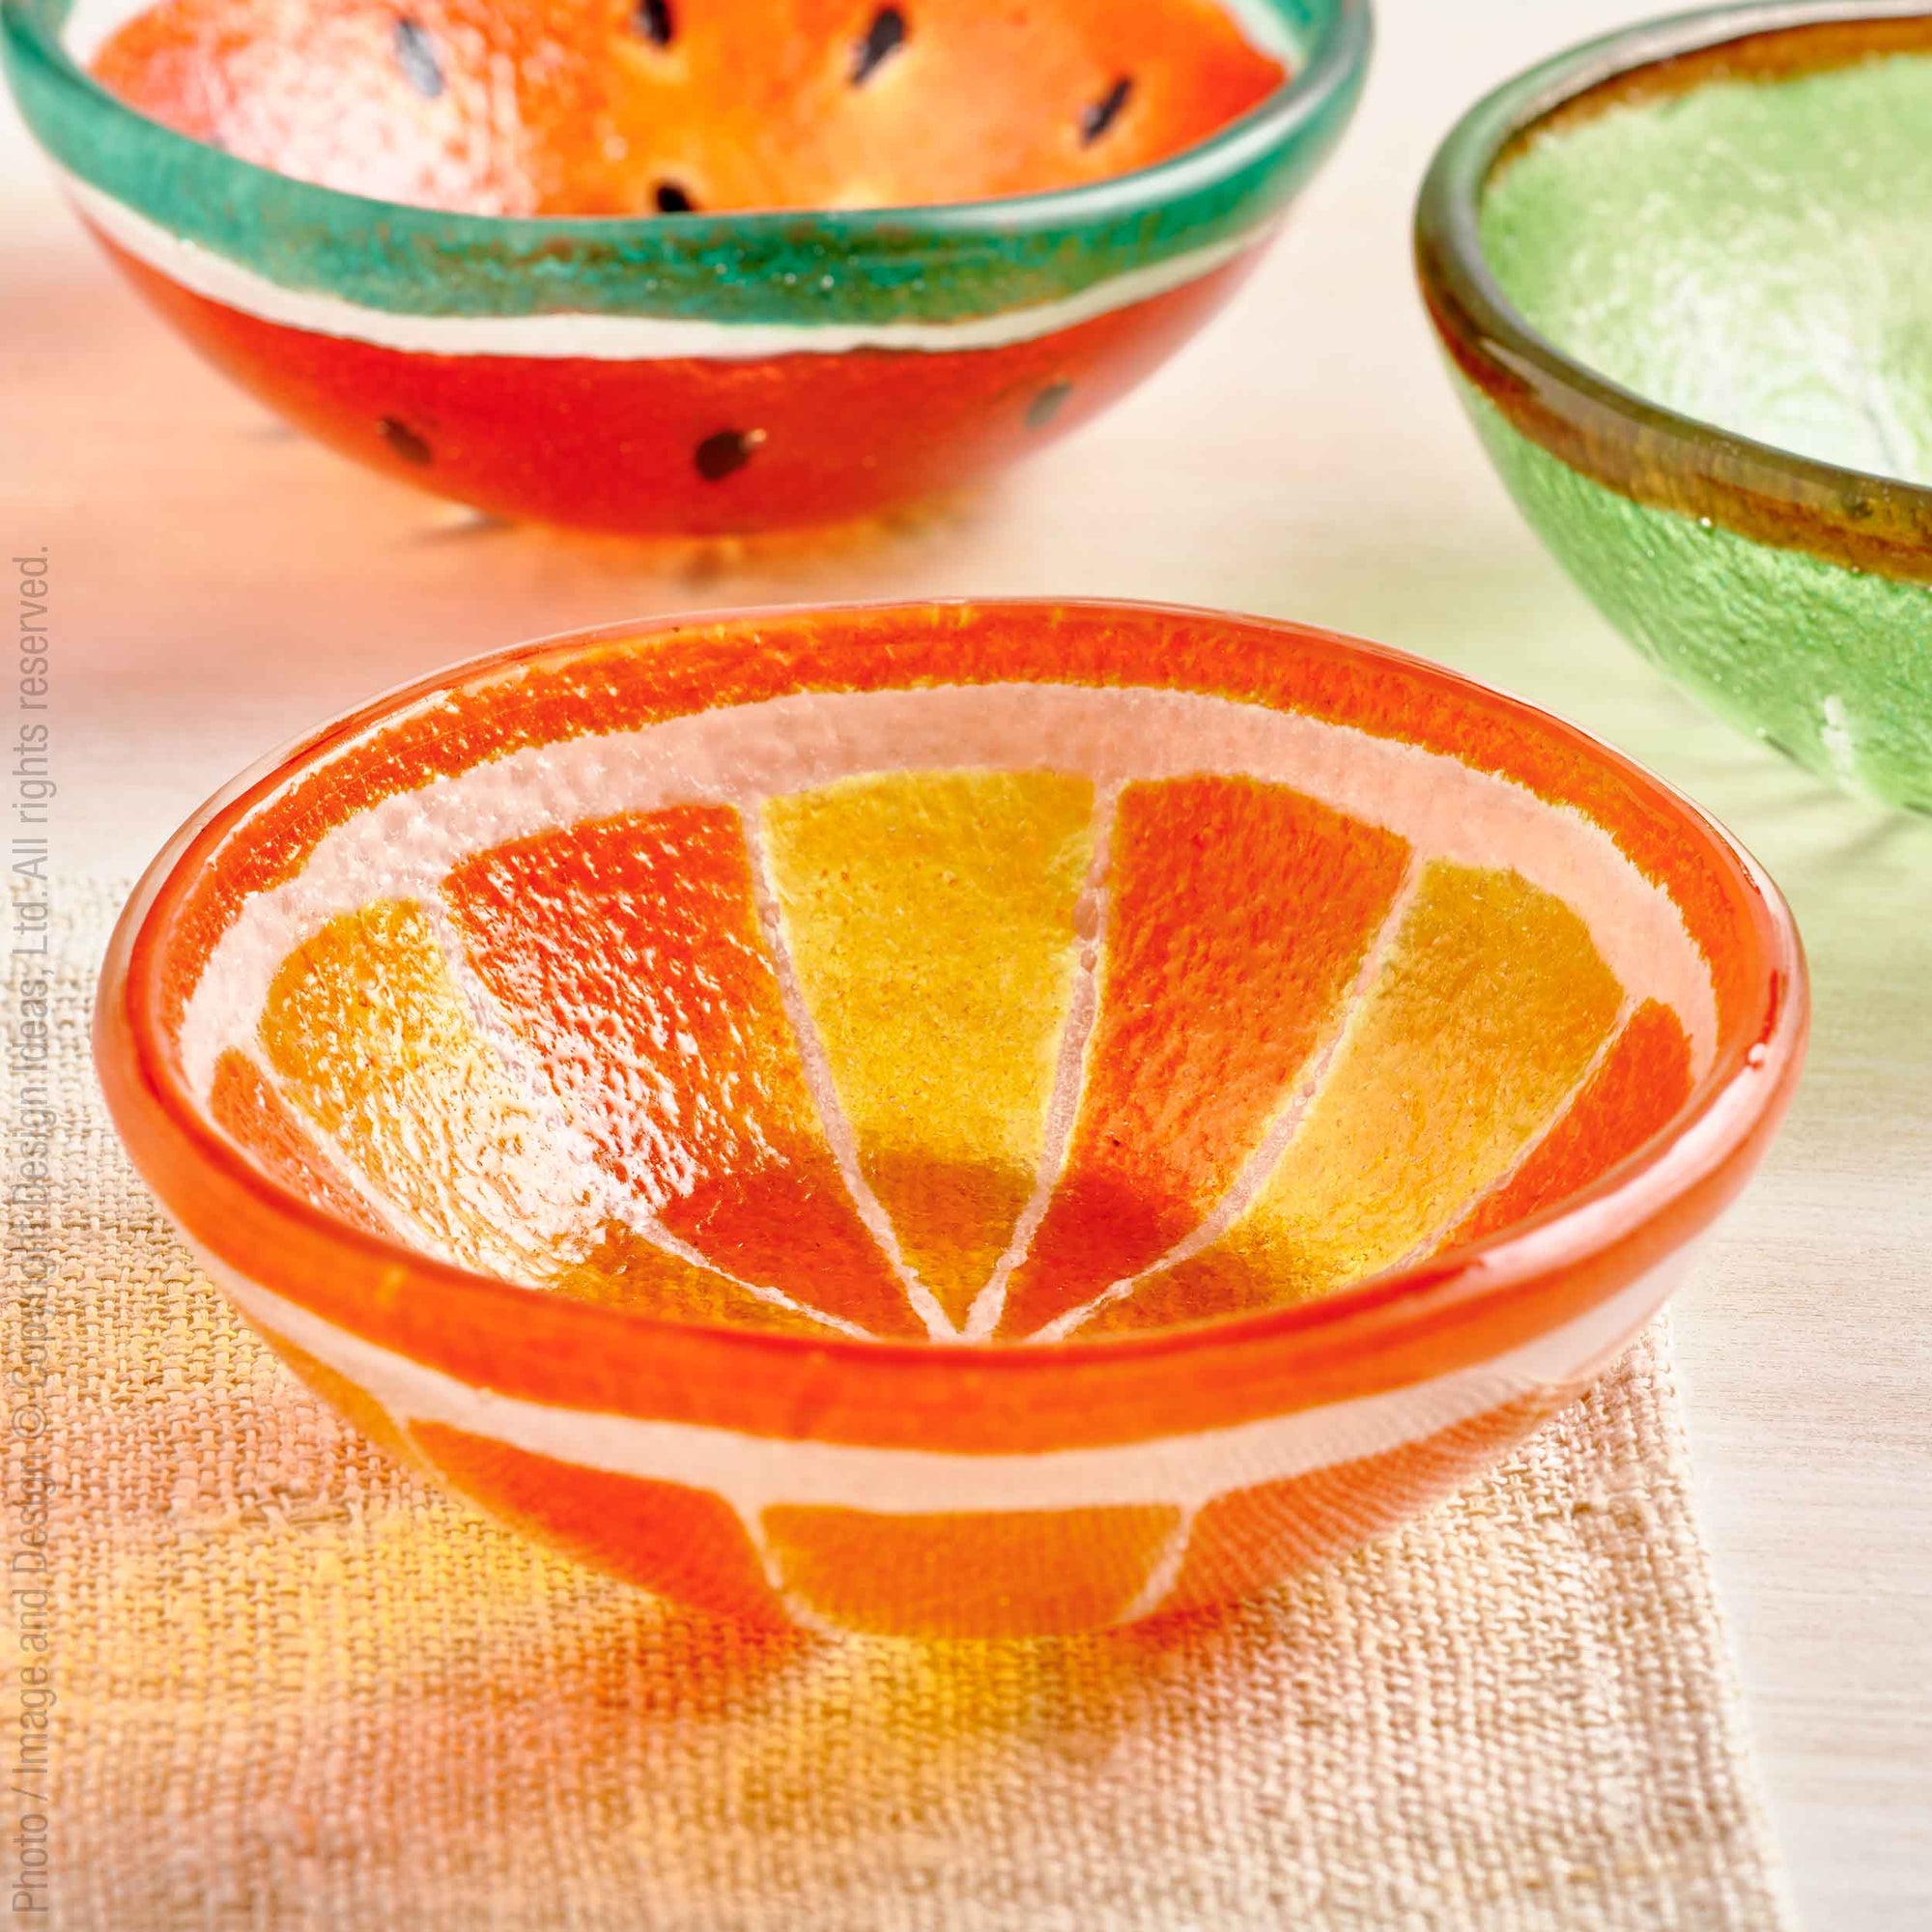 Papeete™ bowl - Orange | Image 1 | Premium Bowl from the Papeete collection | made with Glass for long lasting use | texxture